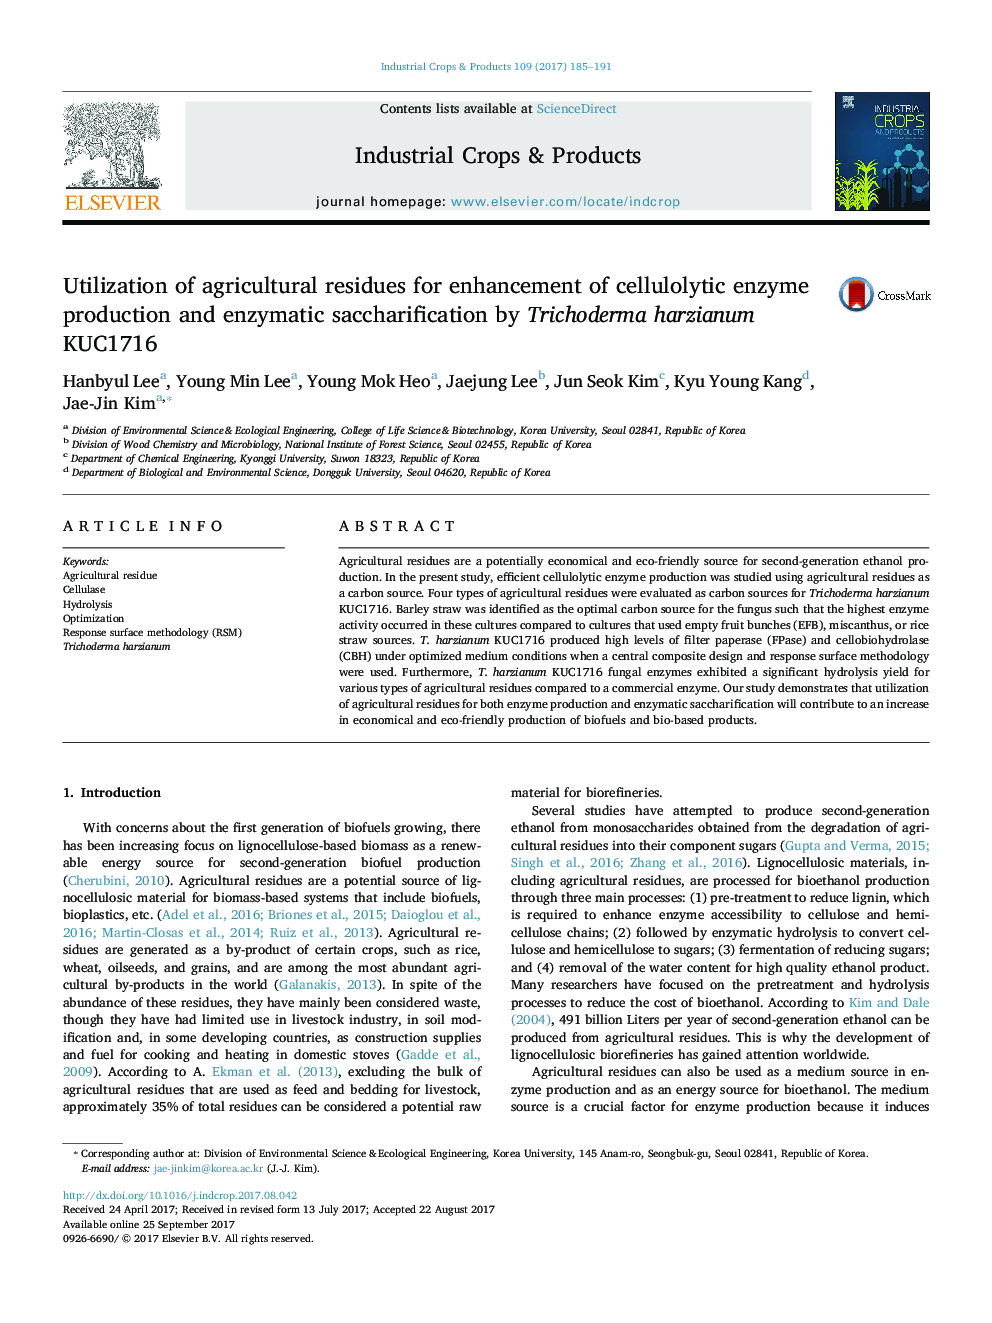 Utilization of agricultural residues for enhancement of cellulolytic enzyme production and enzymatic saccharification by Trichoderma harzianum KUC1716